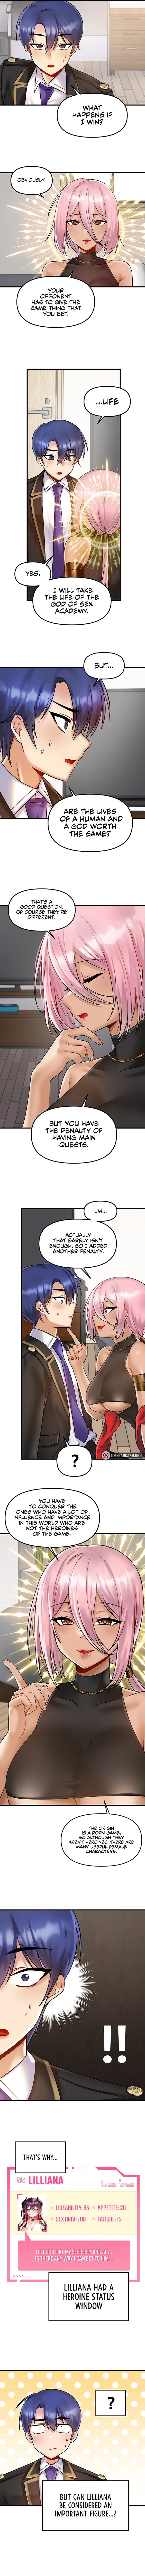 trapped-in-the-academys-eroge-chap-33-4